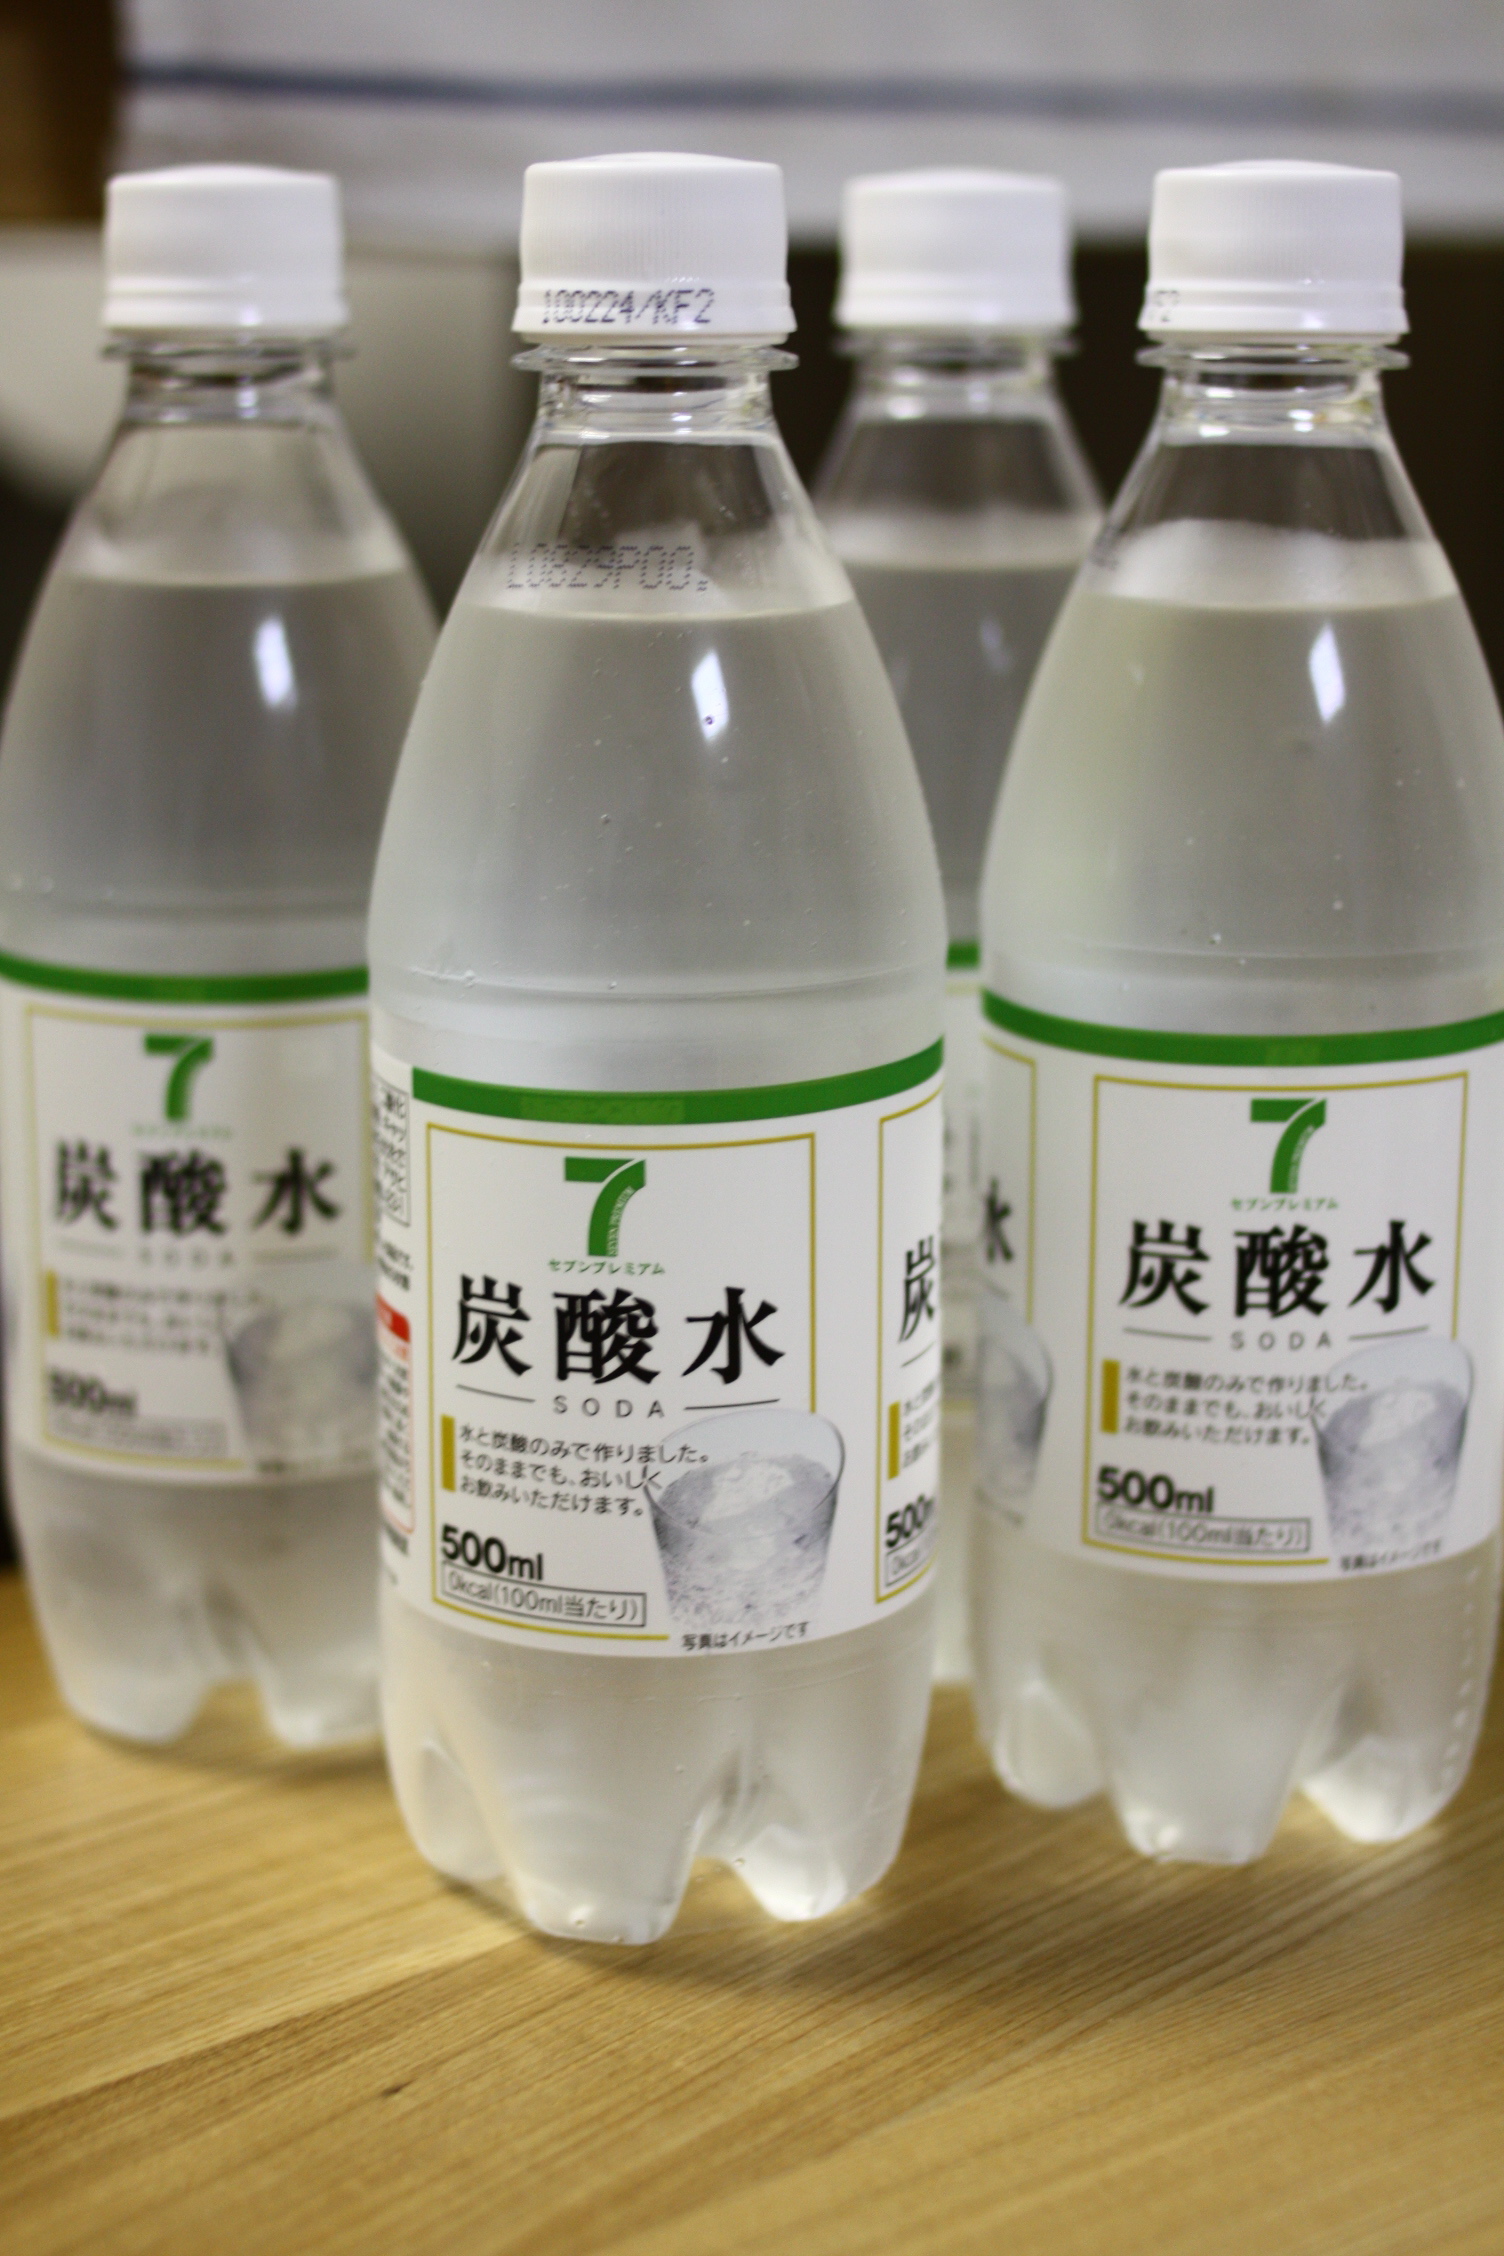 three bottles of water with an inscription on each